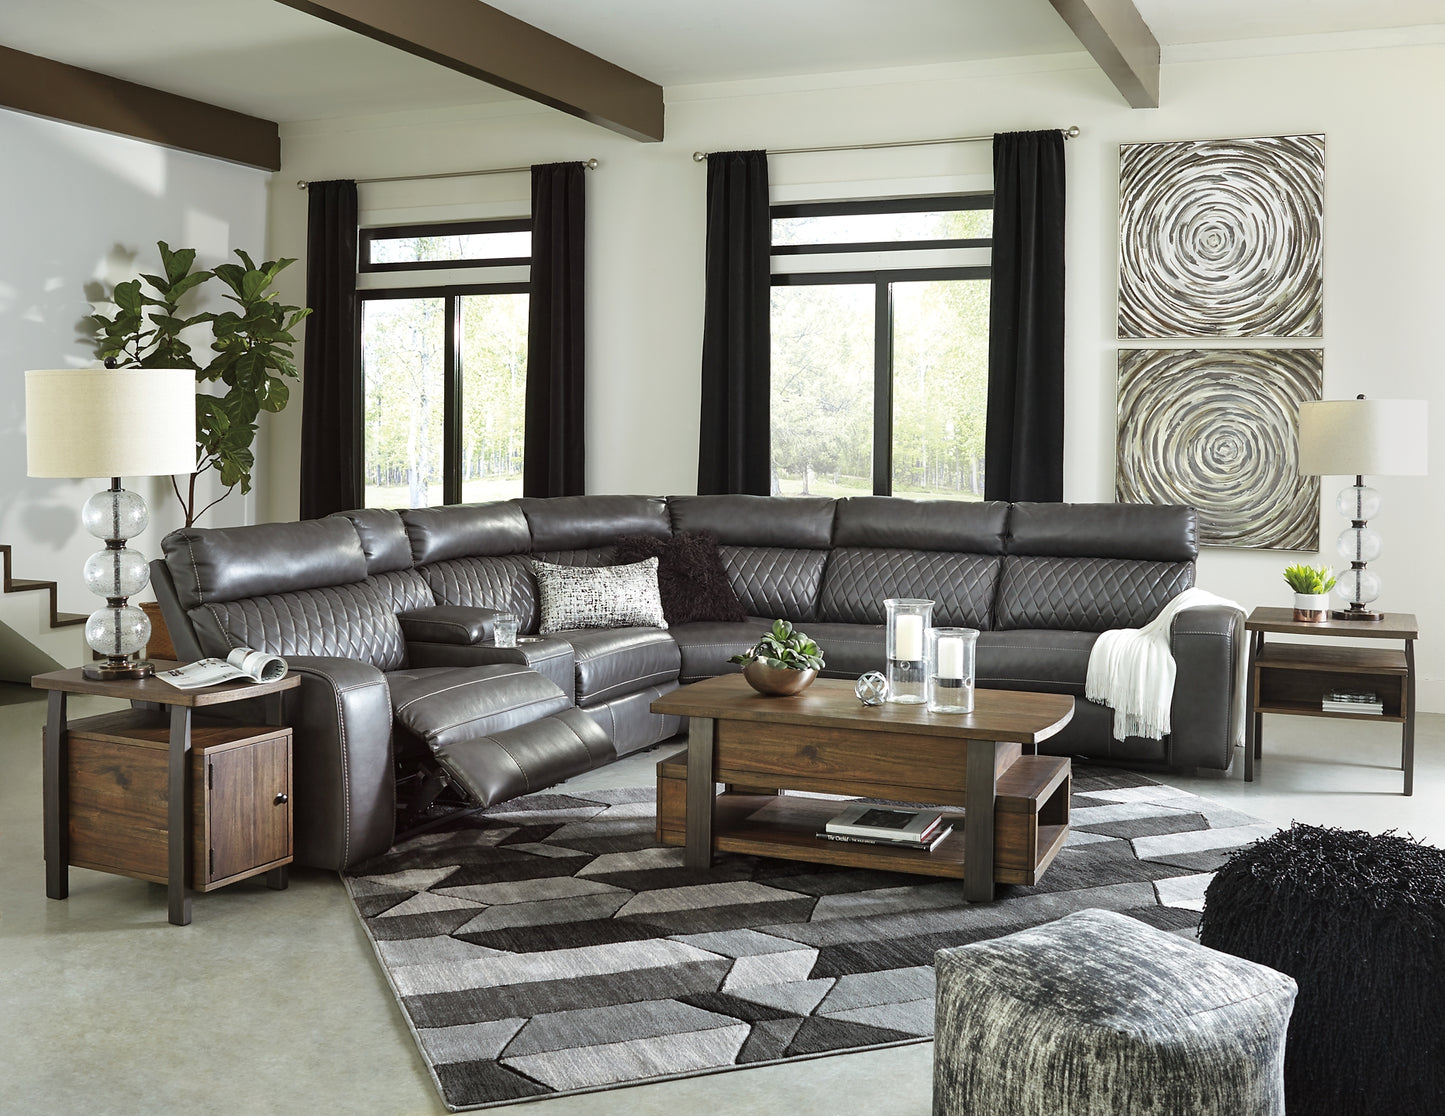 Samperstone 6-Piece Power Reclining Sectional